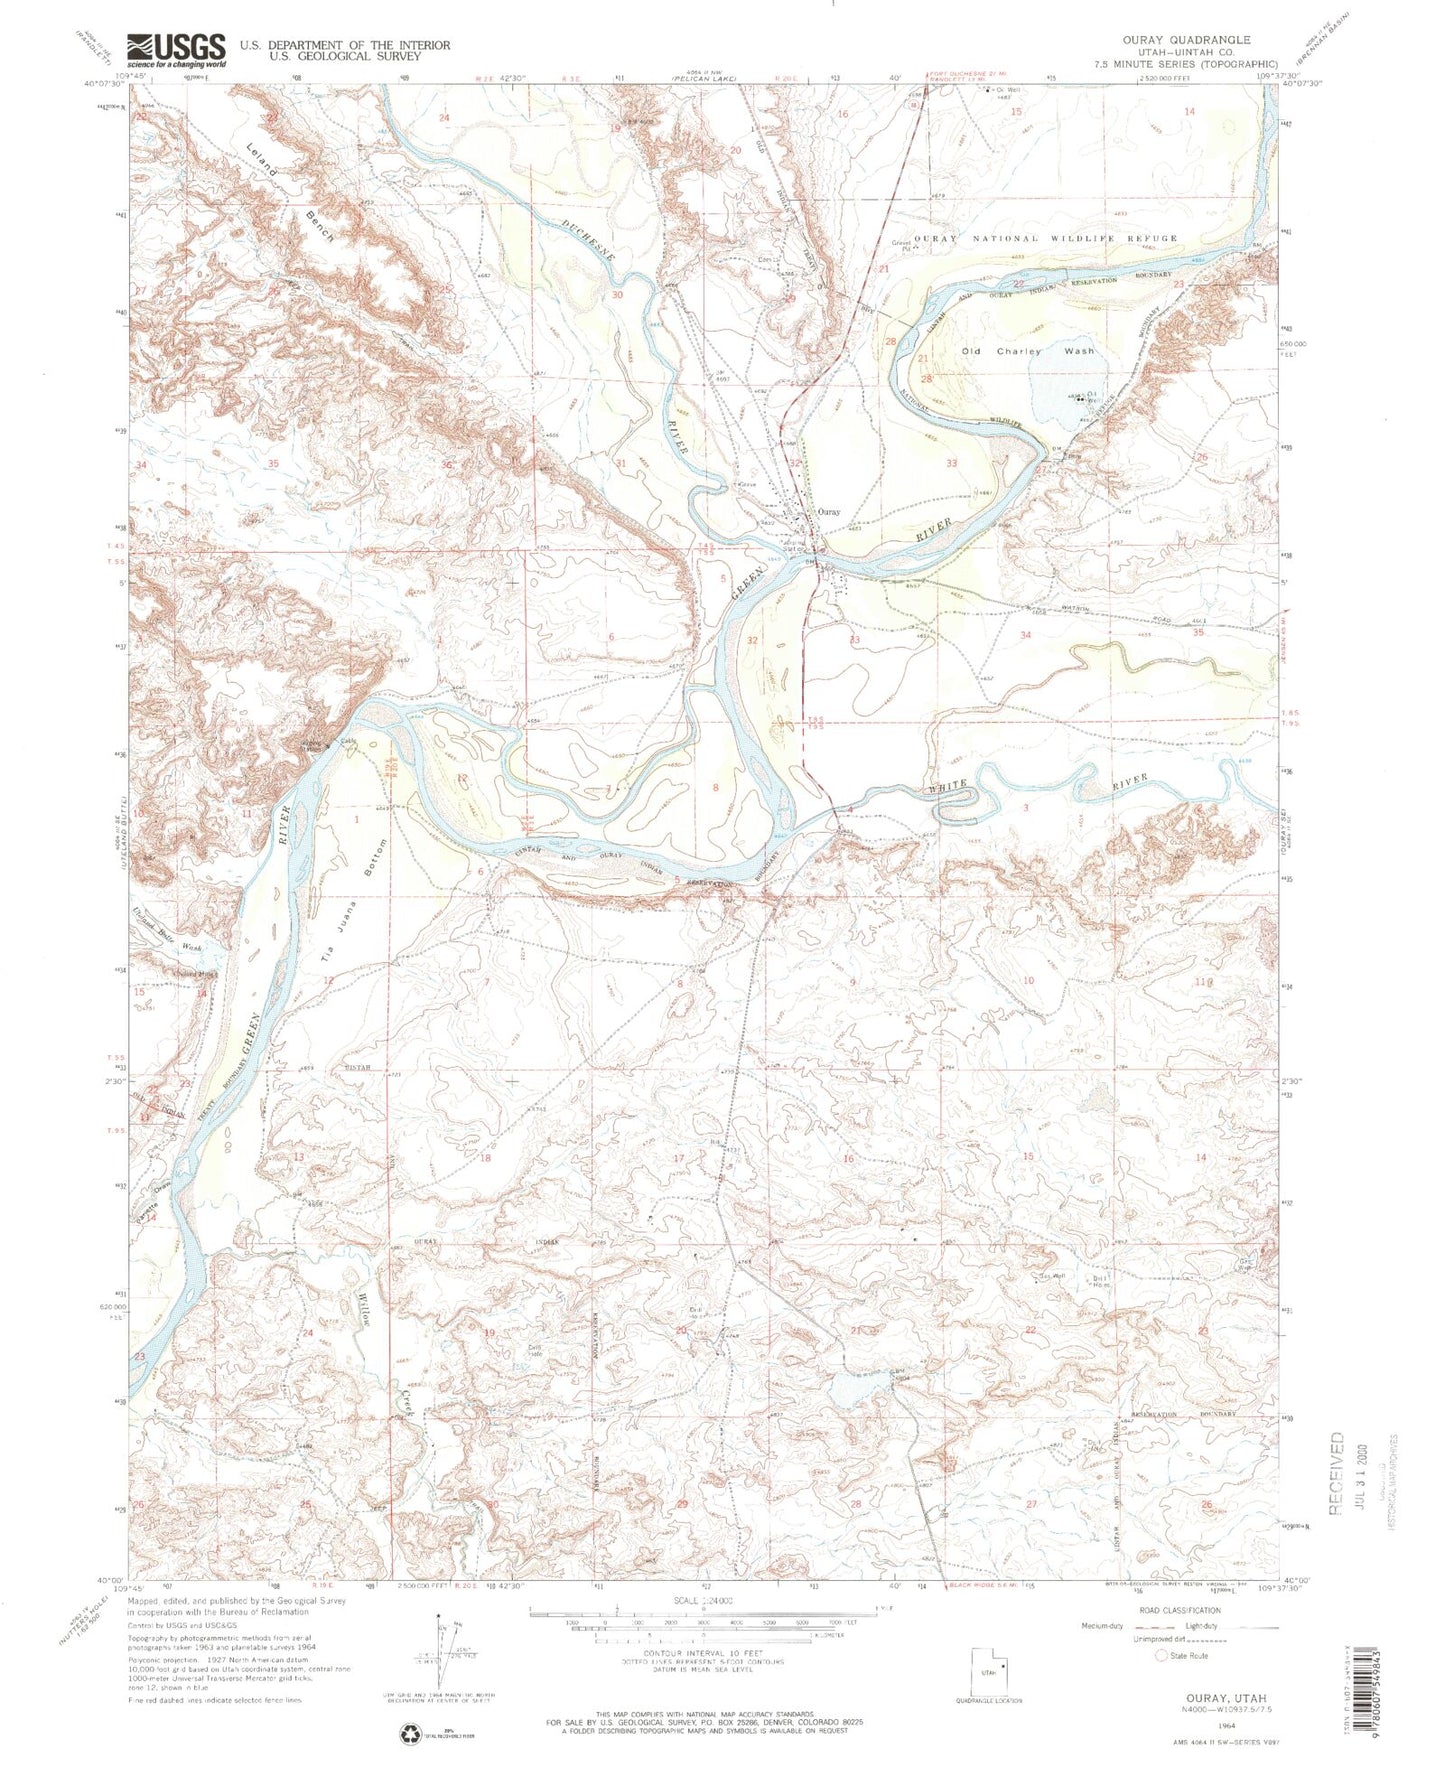 Classic USGS Ouray Utah 7.5'x7.5' Topo Map Image